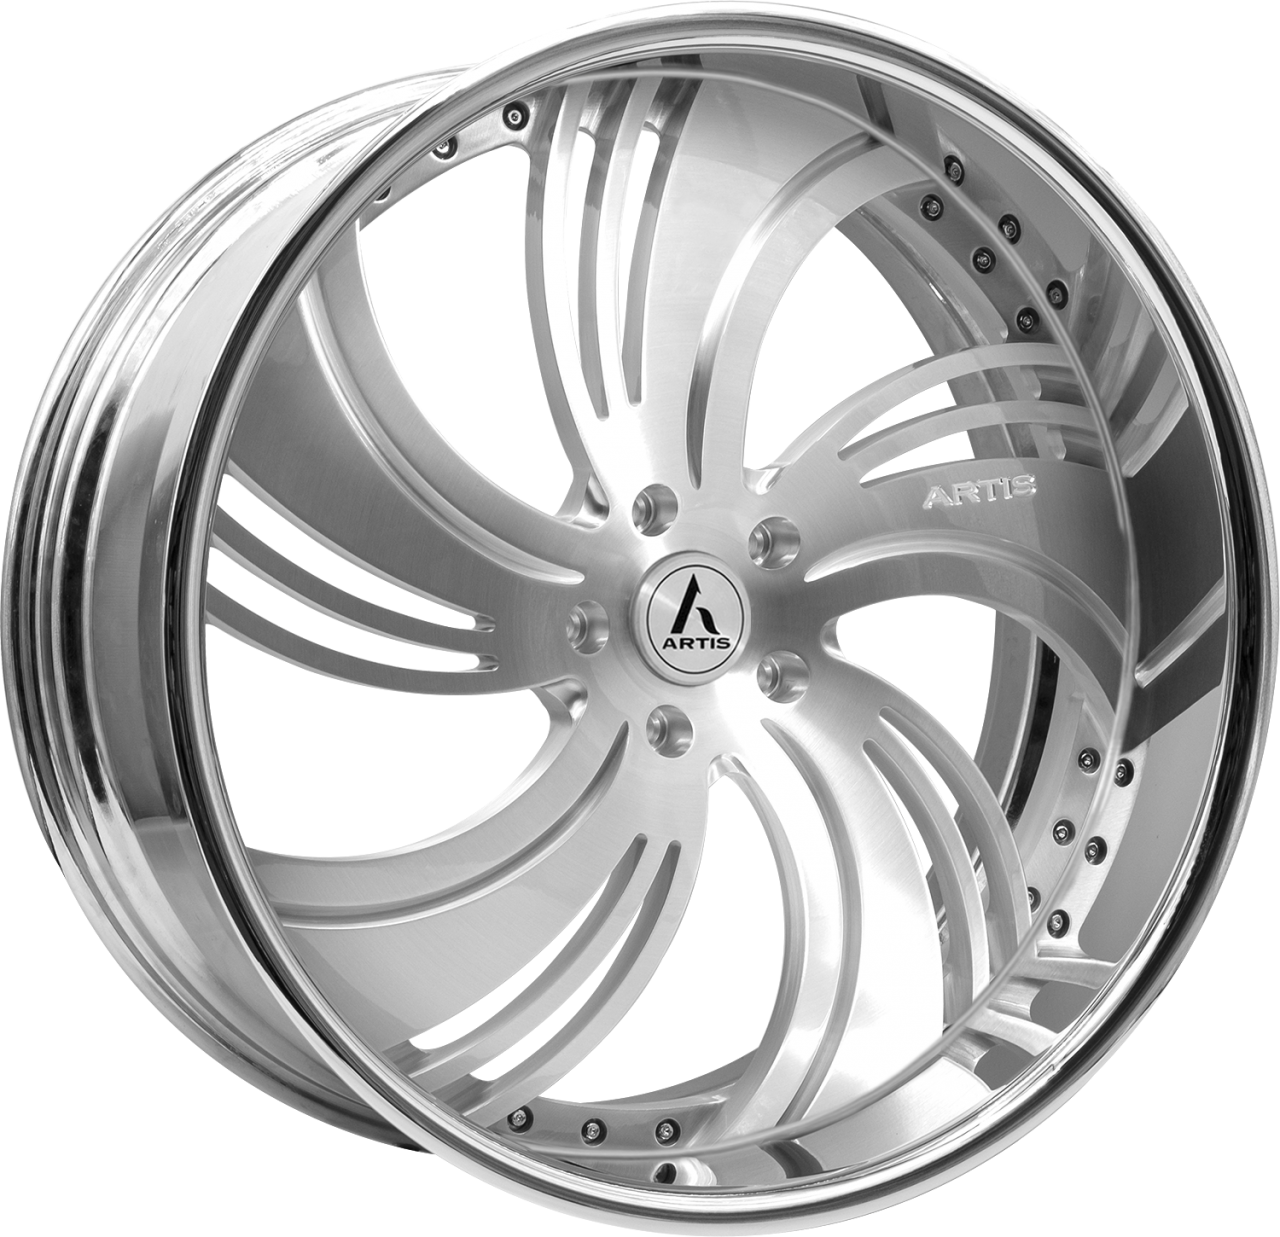 Artis Forged Avenue-M wheel with Brushed finish